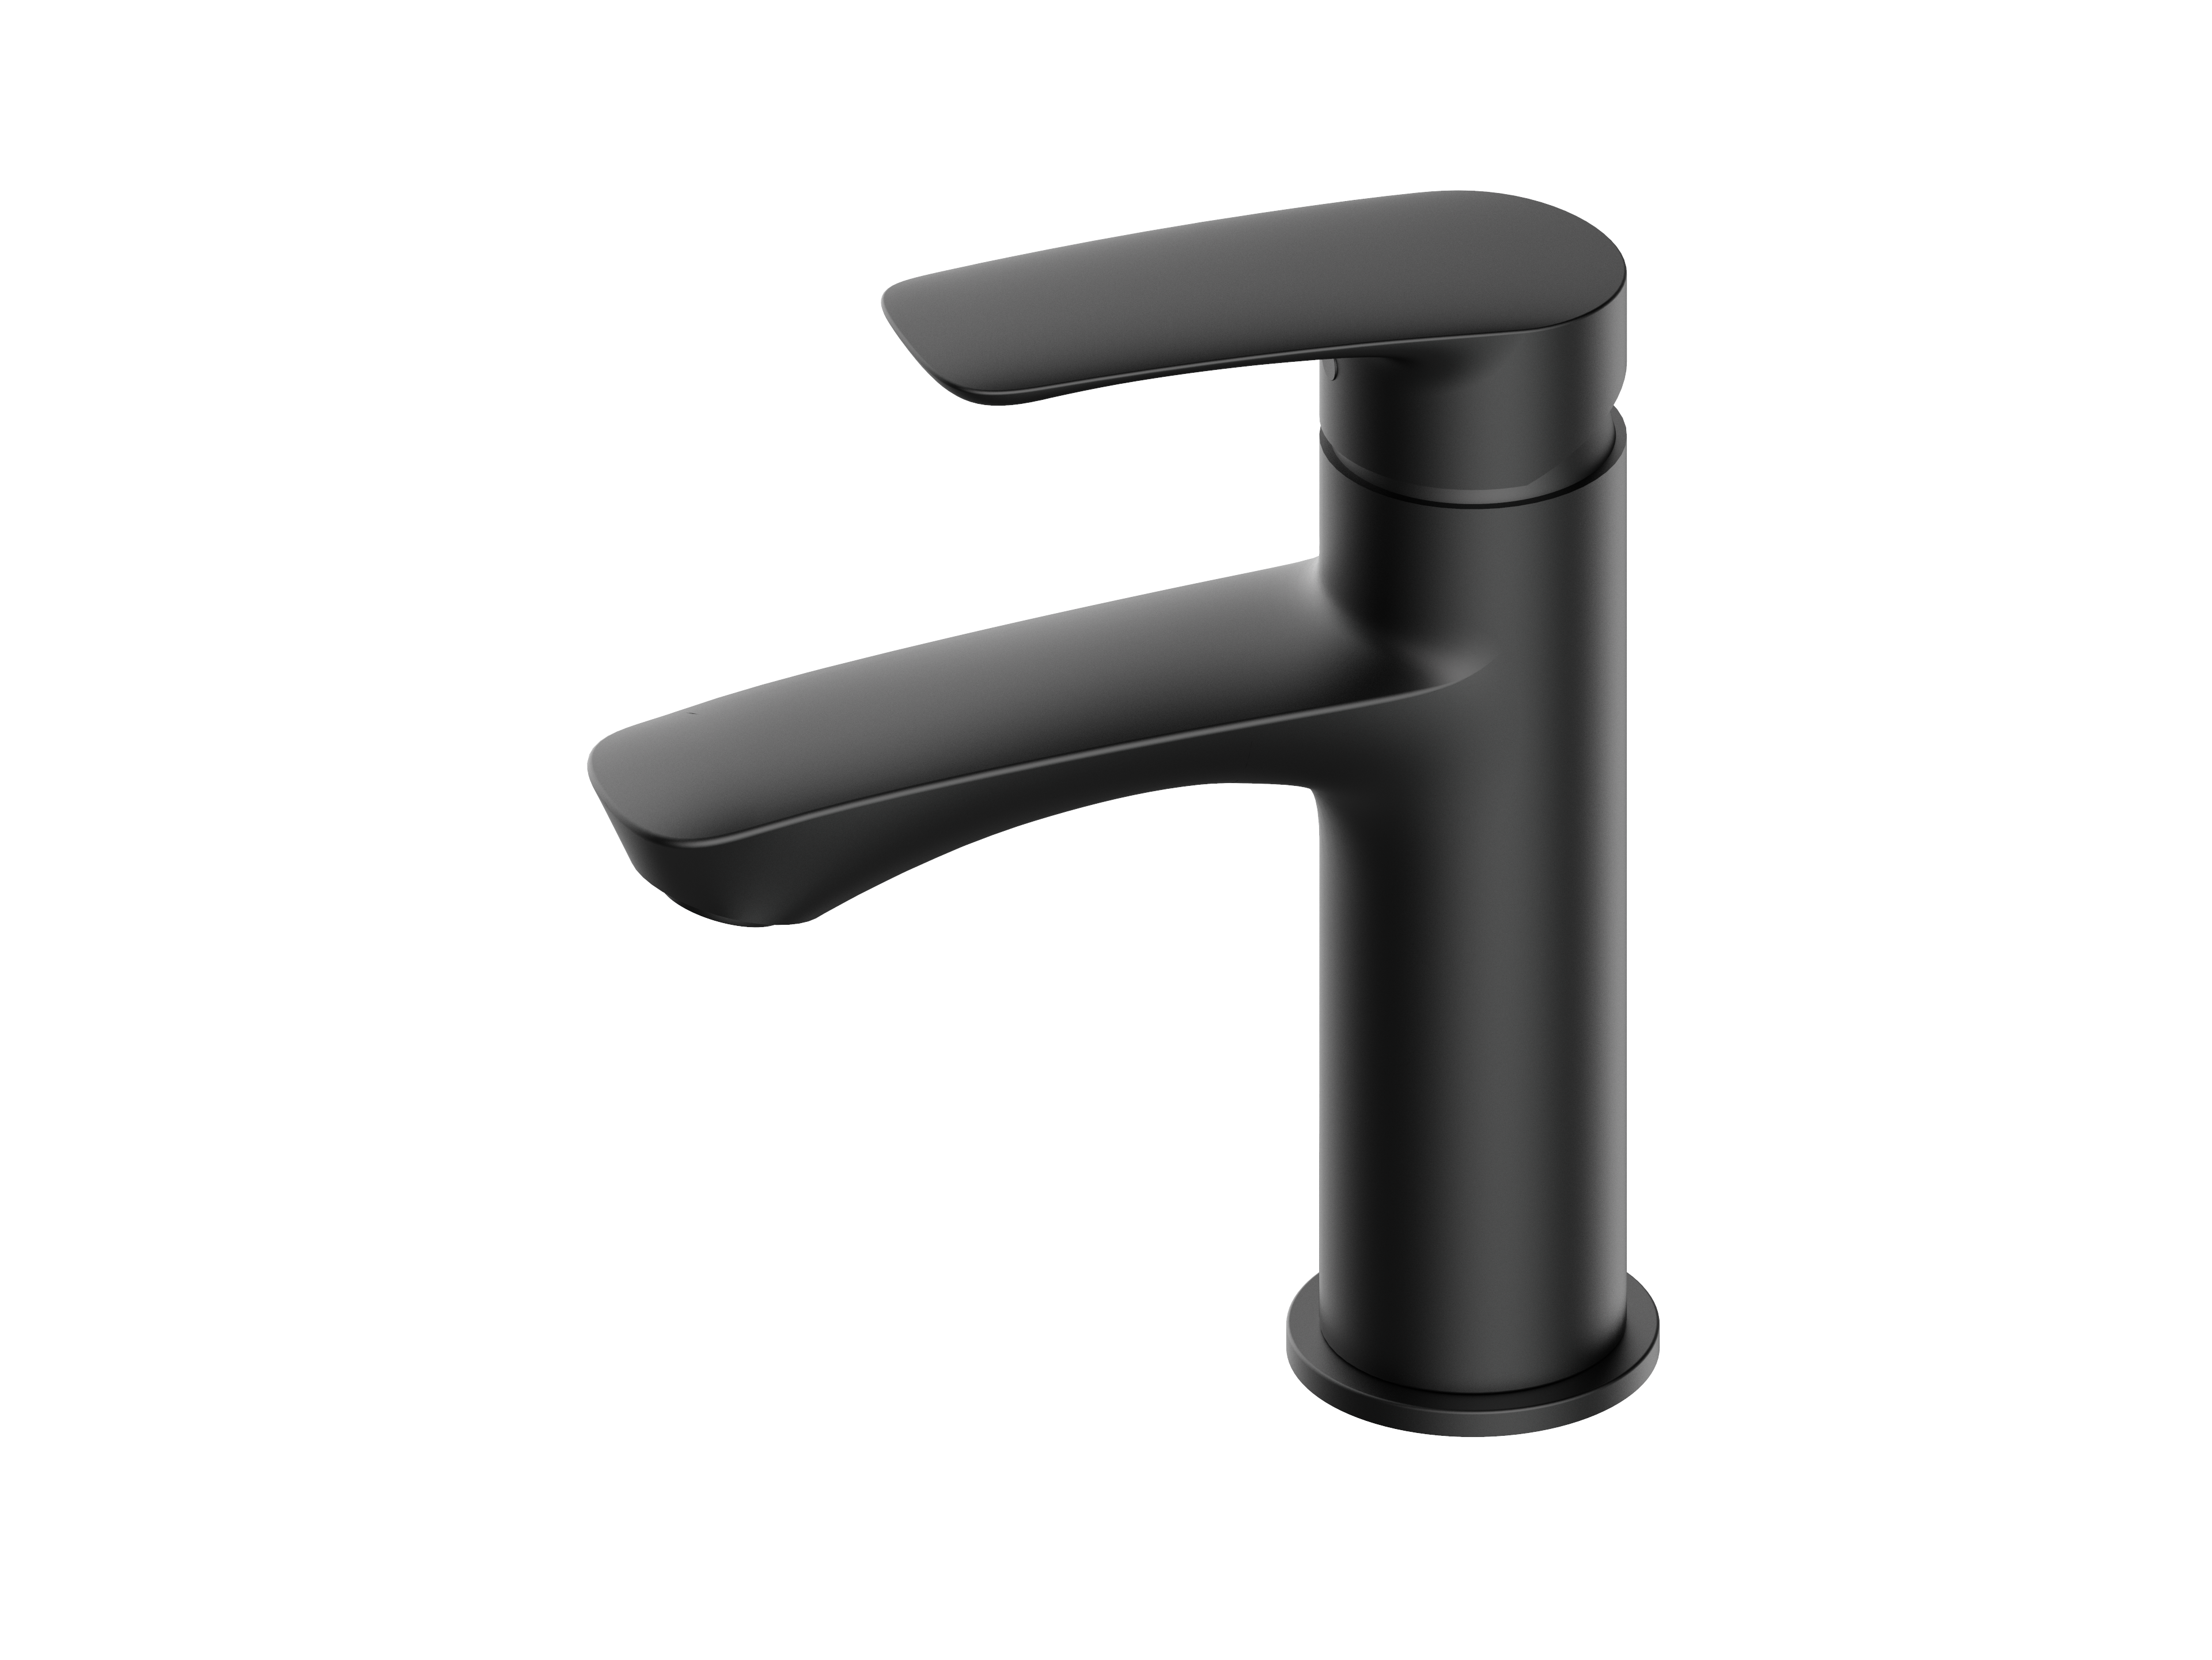 Are there different finishes available for brass basin faucets, and how do they impact their appearance?